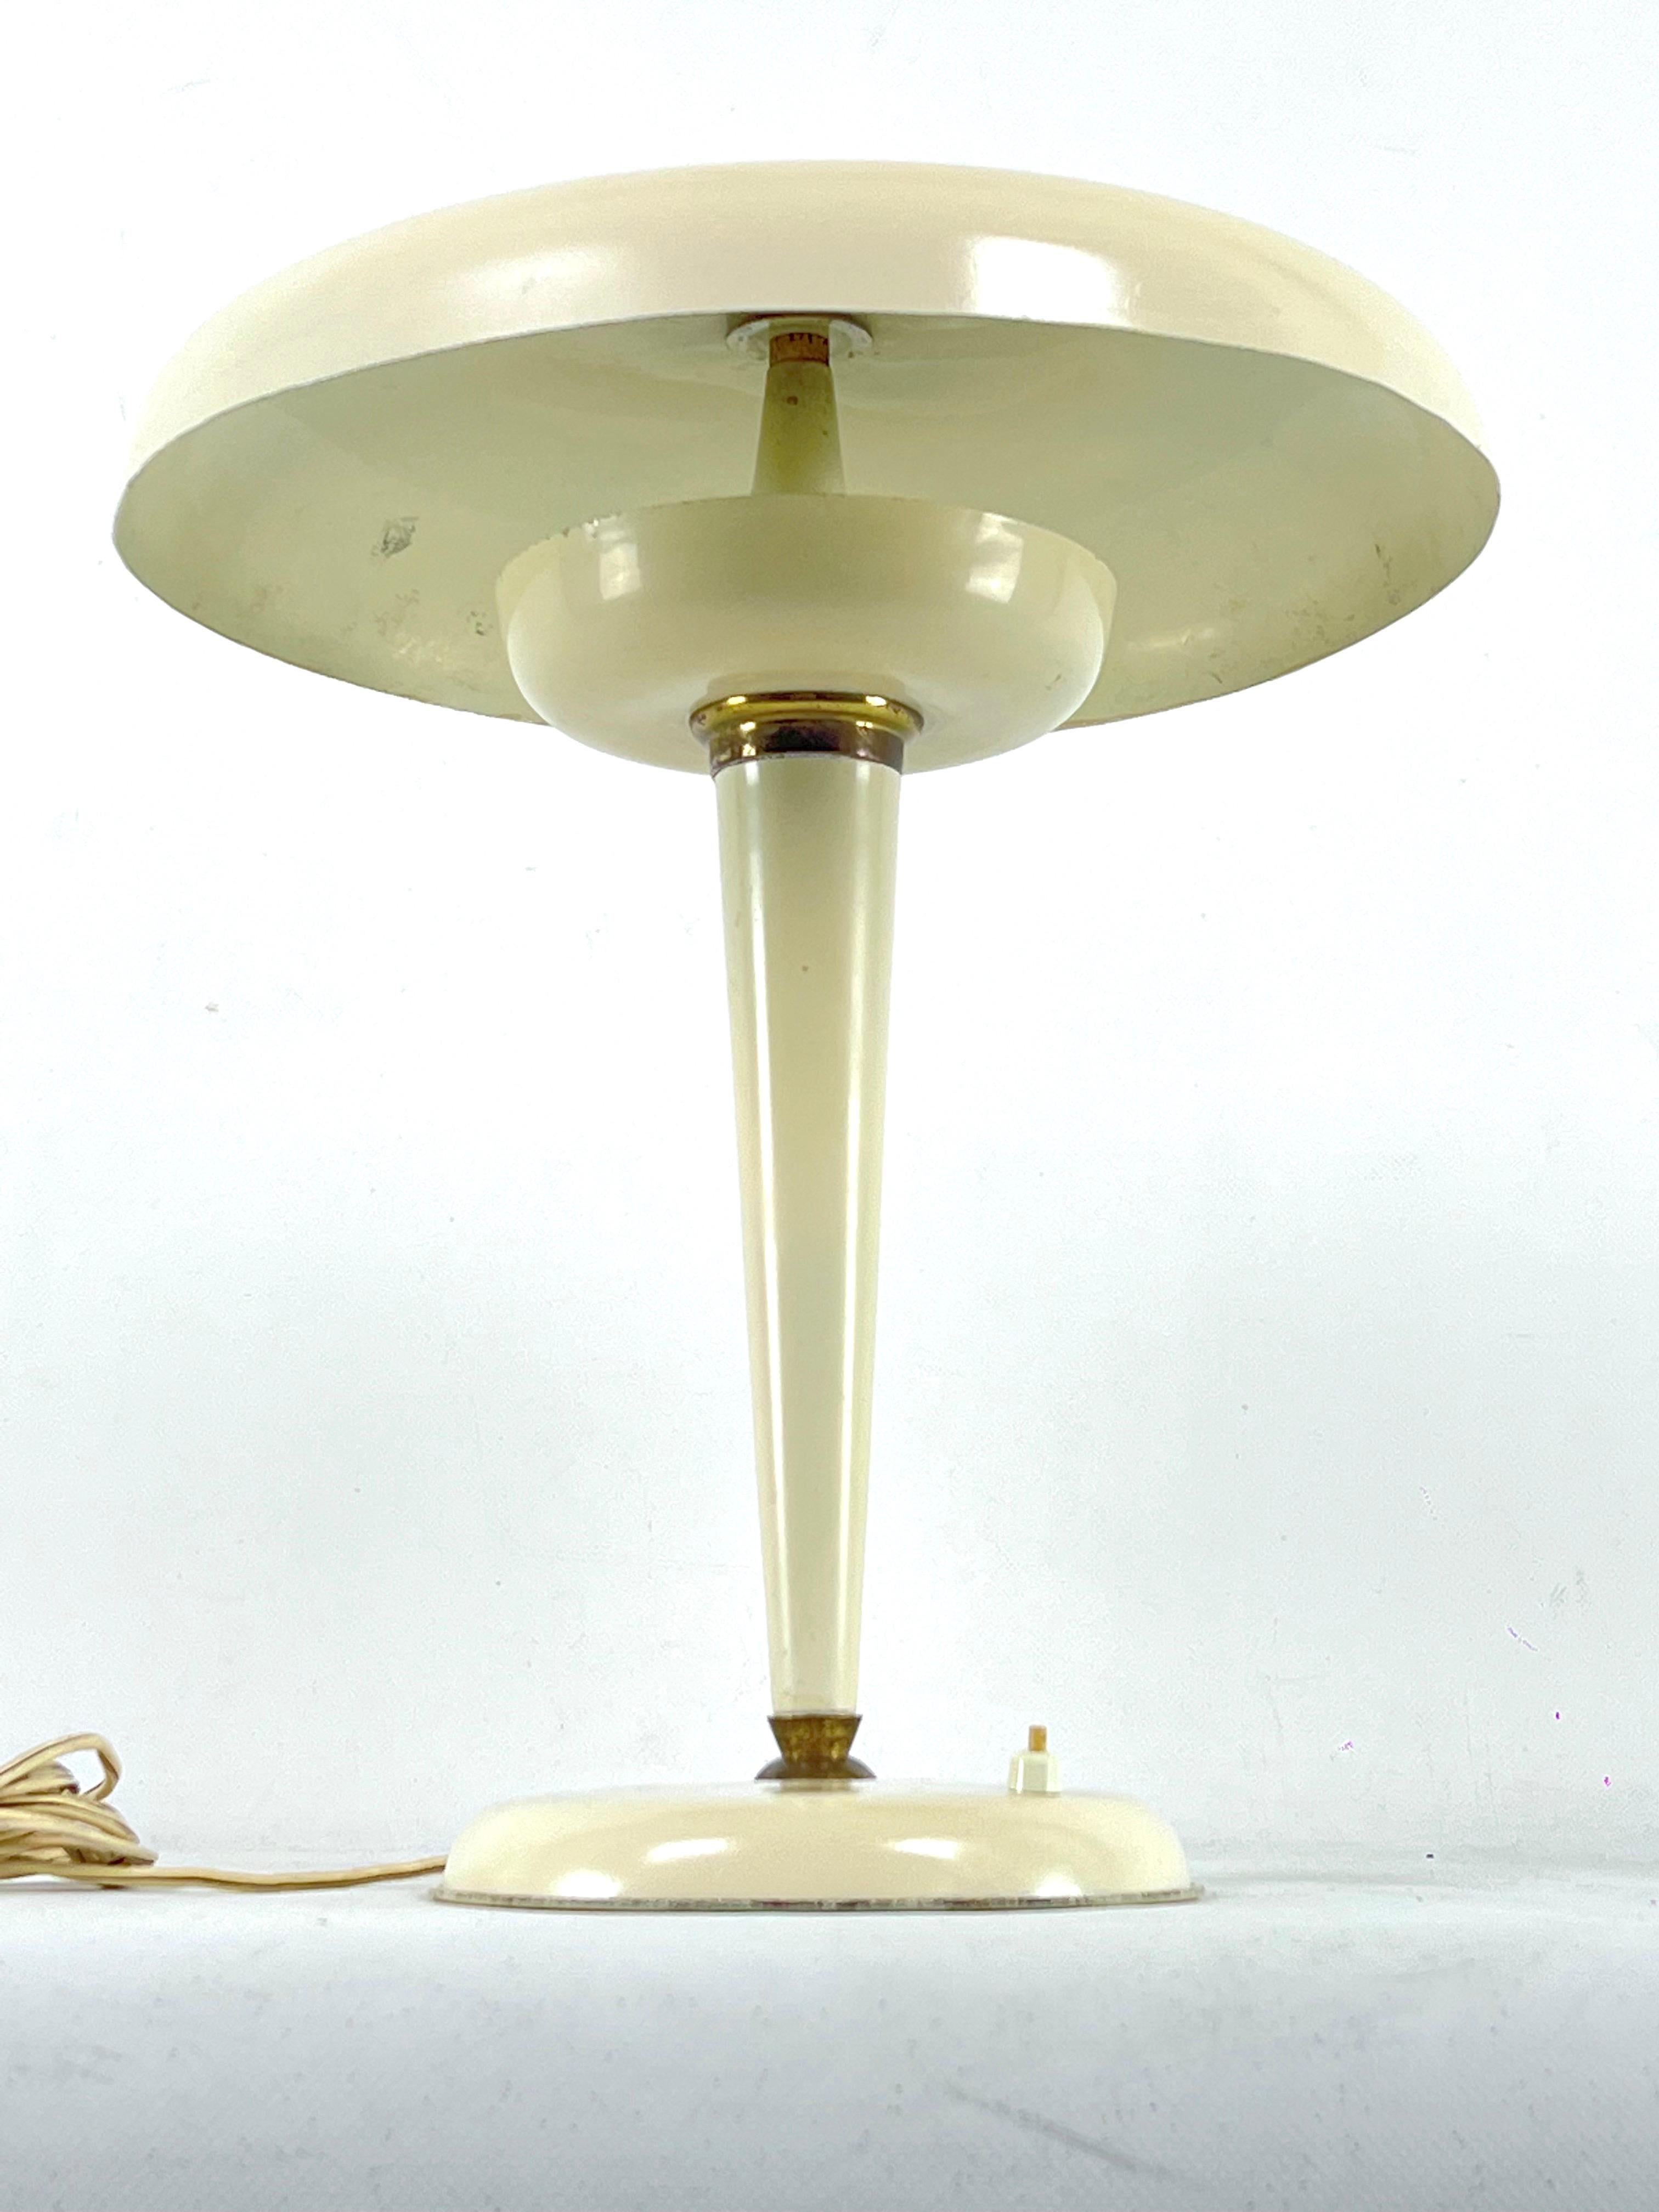 Mid-Century Modern Midcentury Italian Ministerial Desk Lamp in Brass and Ivory Lacquer, Italy, 1950 For Sale